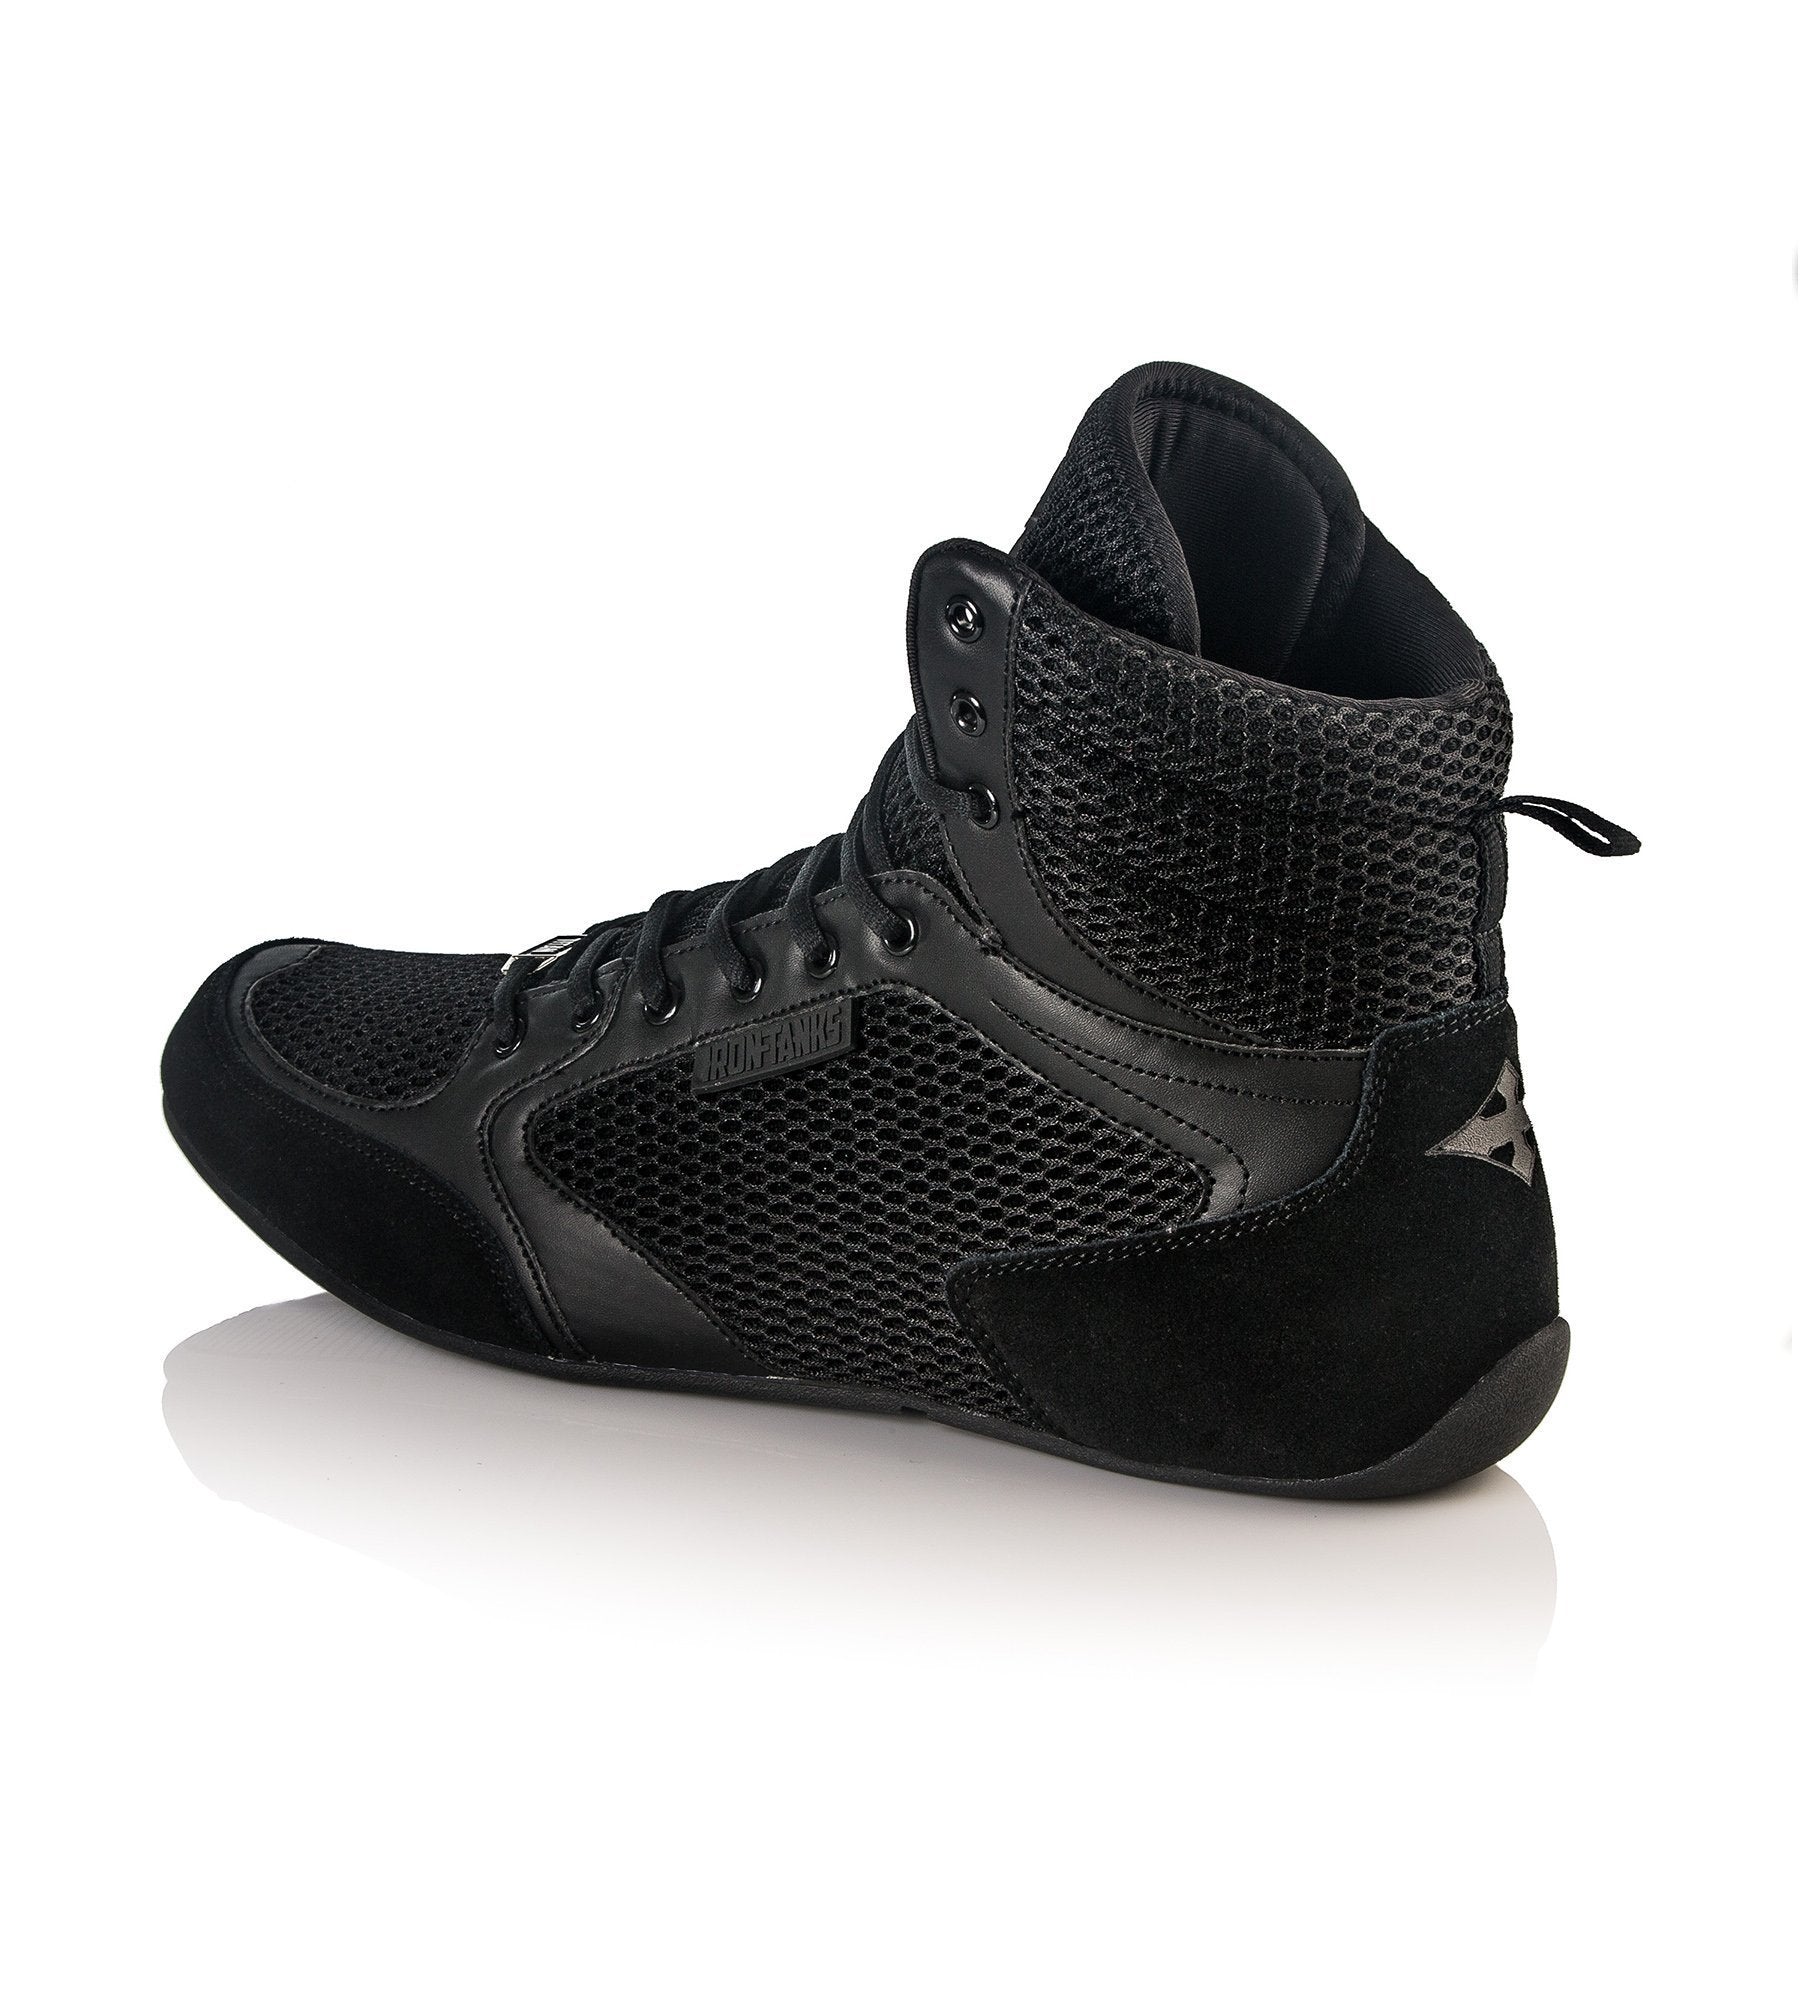 Buy Bodybuilding Gym Shoes Online | Powerlifting & Weightlifting Shoes